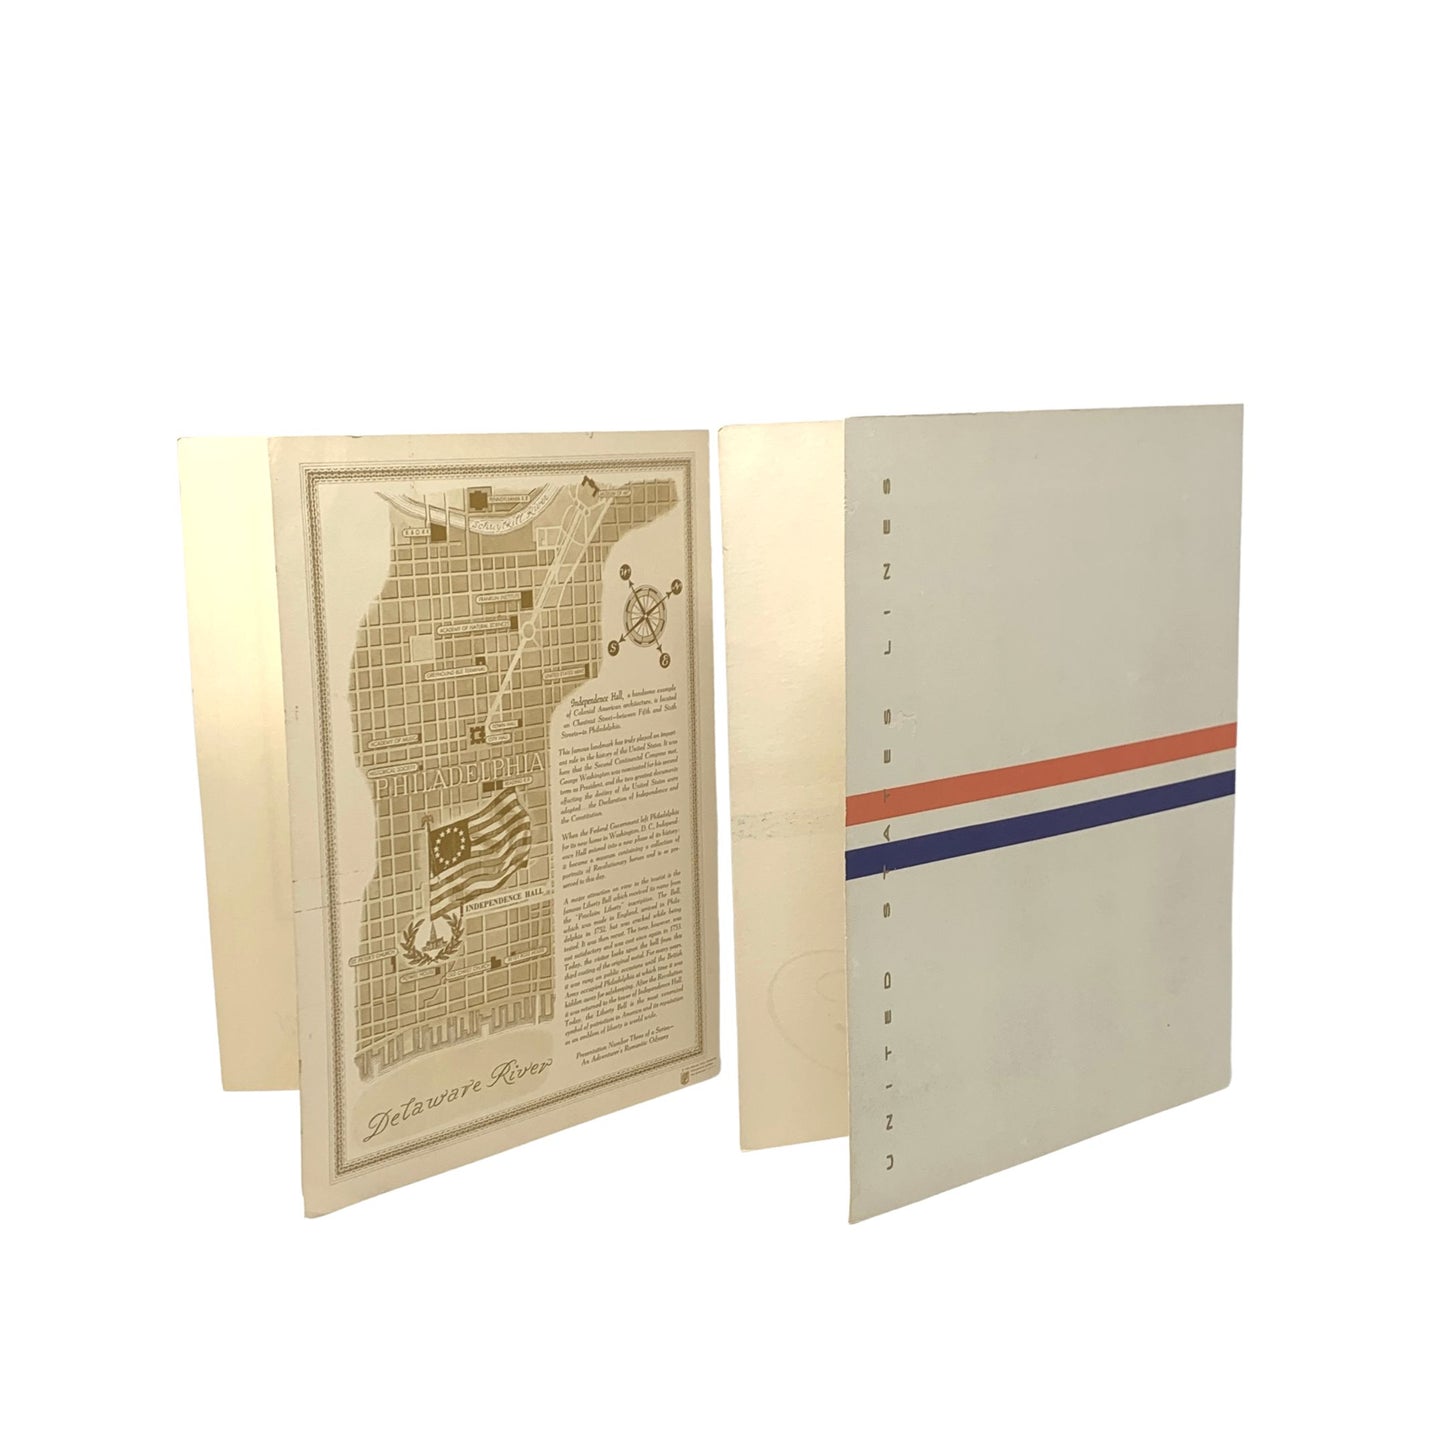 SS United States Menu Covers (2)